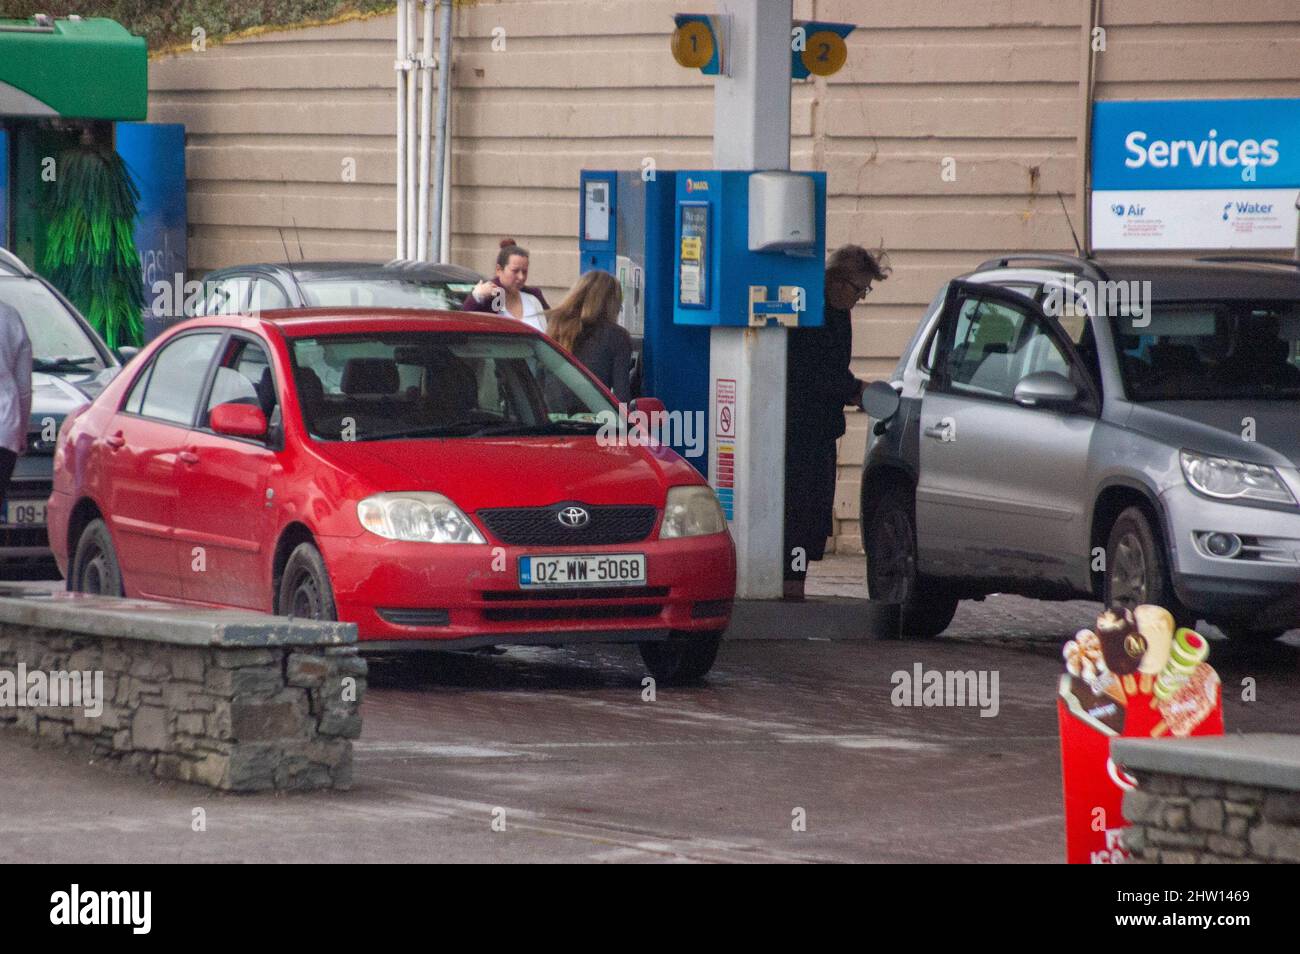 Bantry, West Cork, Ireland Thursday 3 Mar, 2022; Cost of fuel has risen sharply due to the ongoing war between Russia and Ukraine and the invasion by Russia. A barrel of Oil has now reached  $100 a barrel which has a knock on effect on motorists. At Maxol Service station in Bantry today, petrol is priced at 181.9per Litre and diesel 171.9 per litre. Motorist filled their vehicles at the station with fears of futher increases in the cost of fuel. Credit ED/Alamy Live News Stock Photo